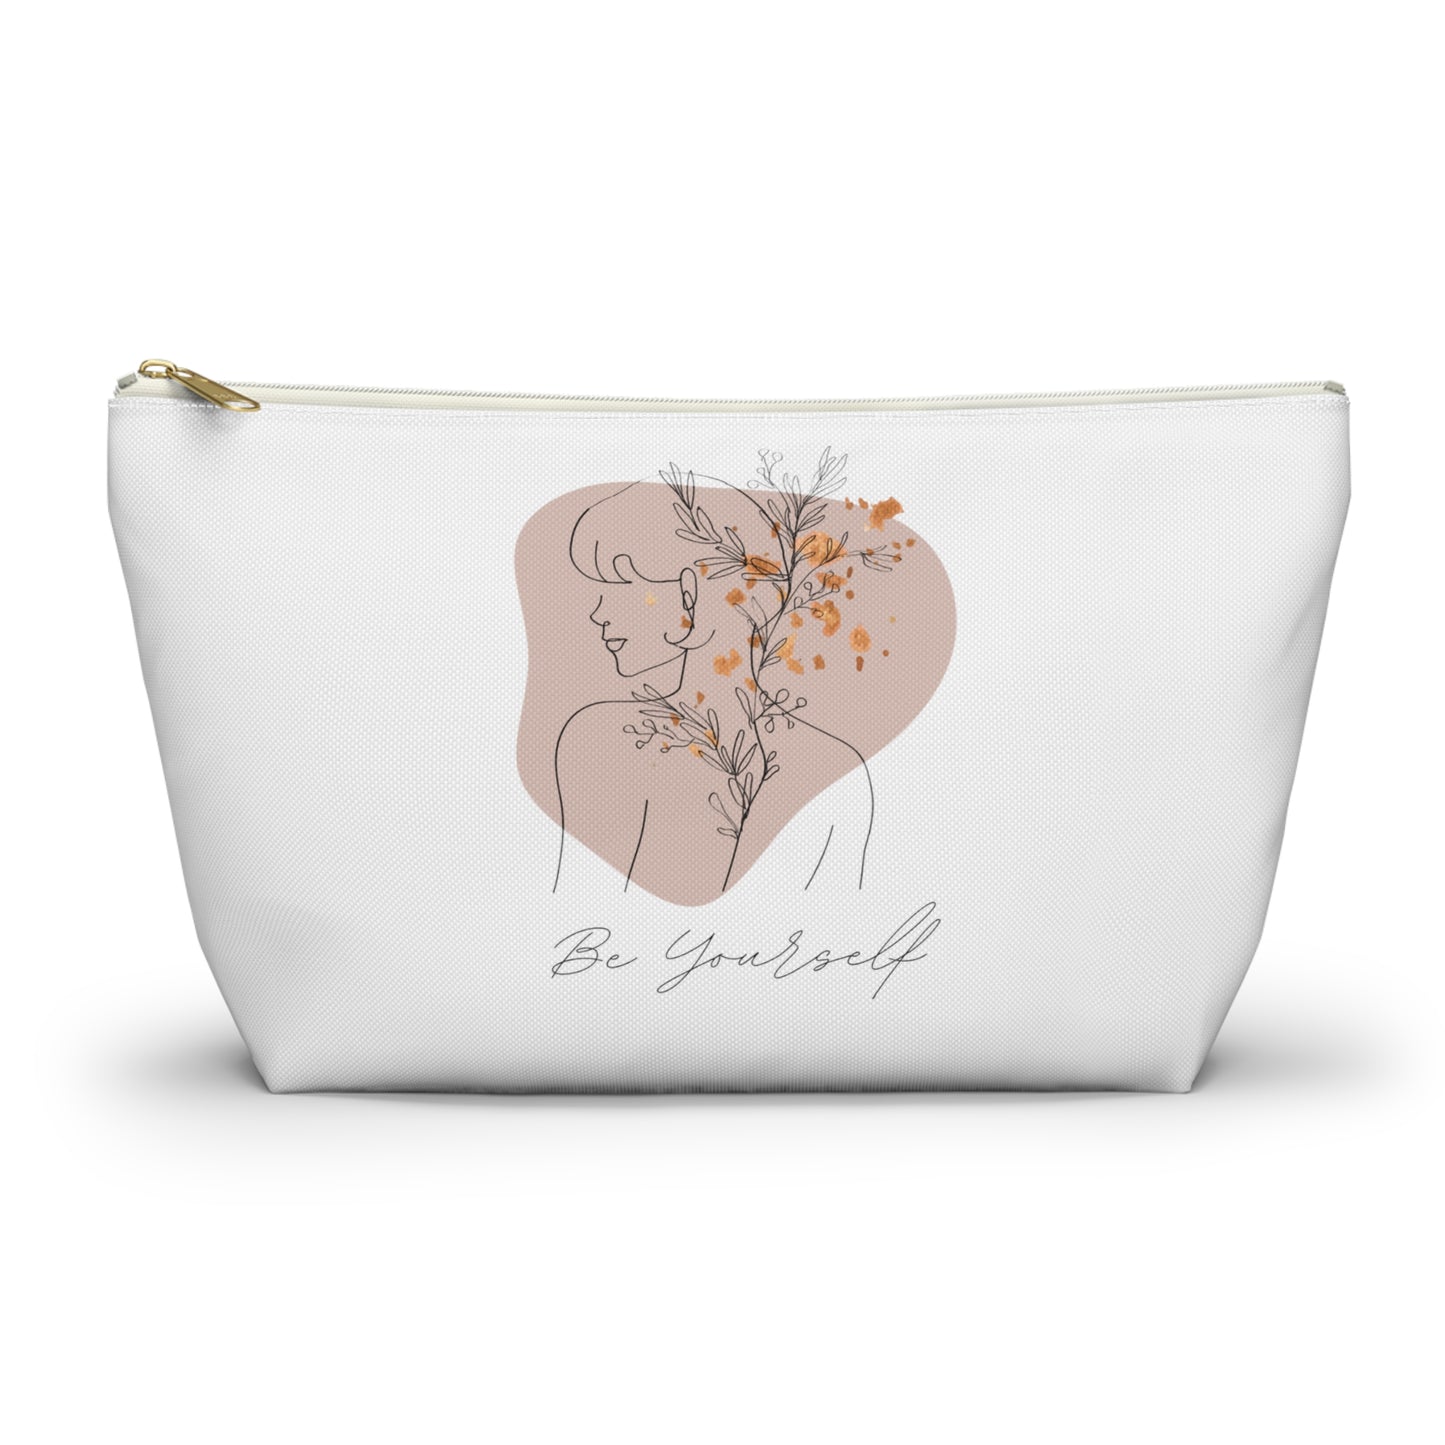 Accessory Pouch For Her